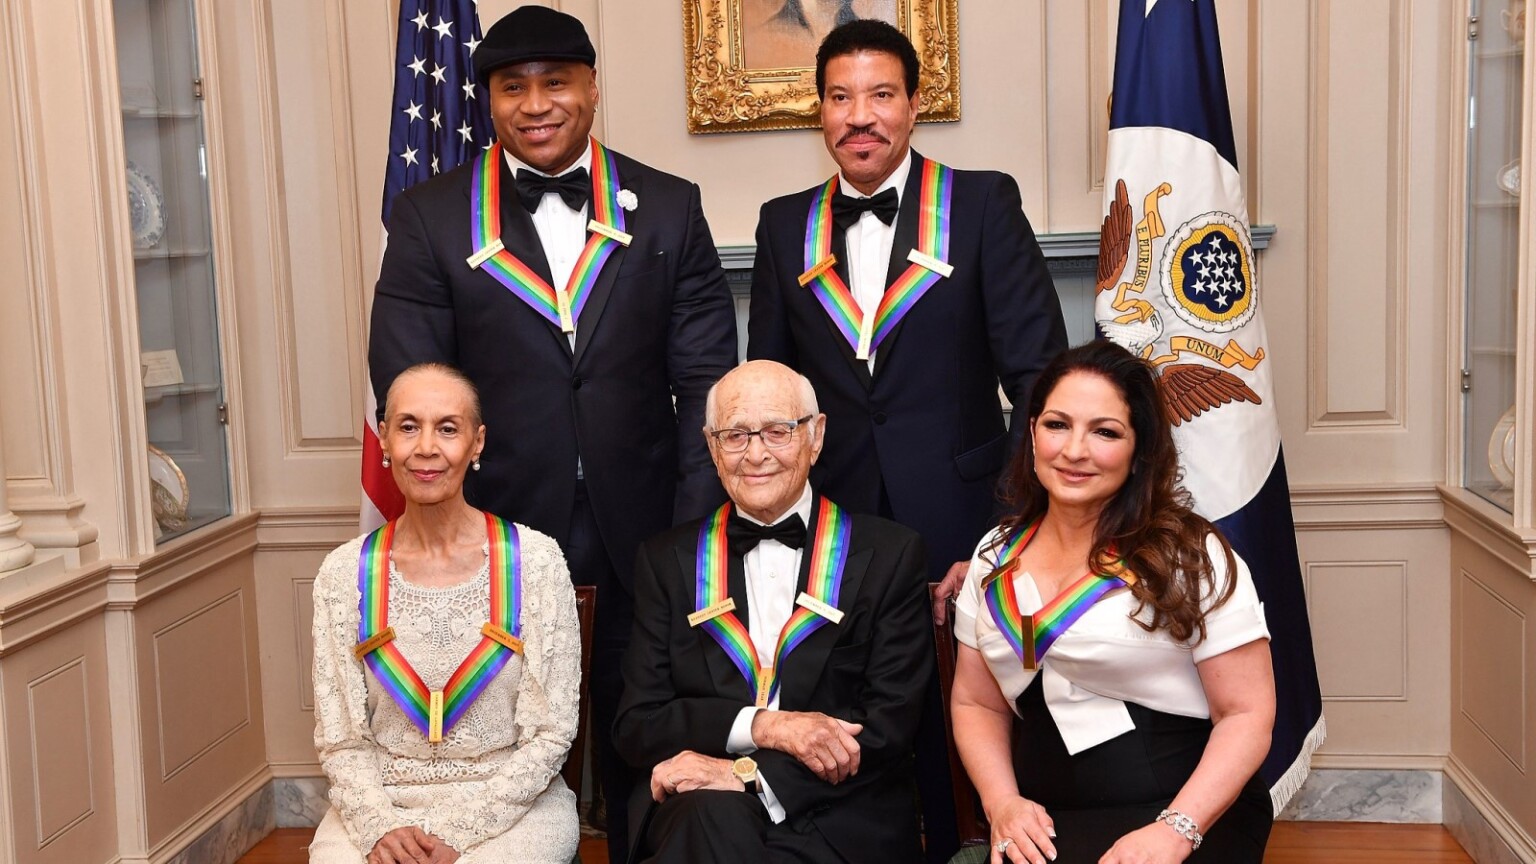 Watch 'Kennedy Center Honors 2019' Online - Live Stream Anywhere